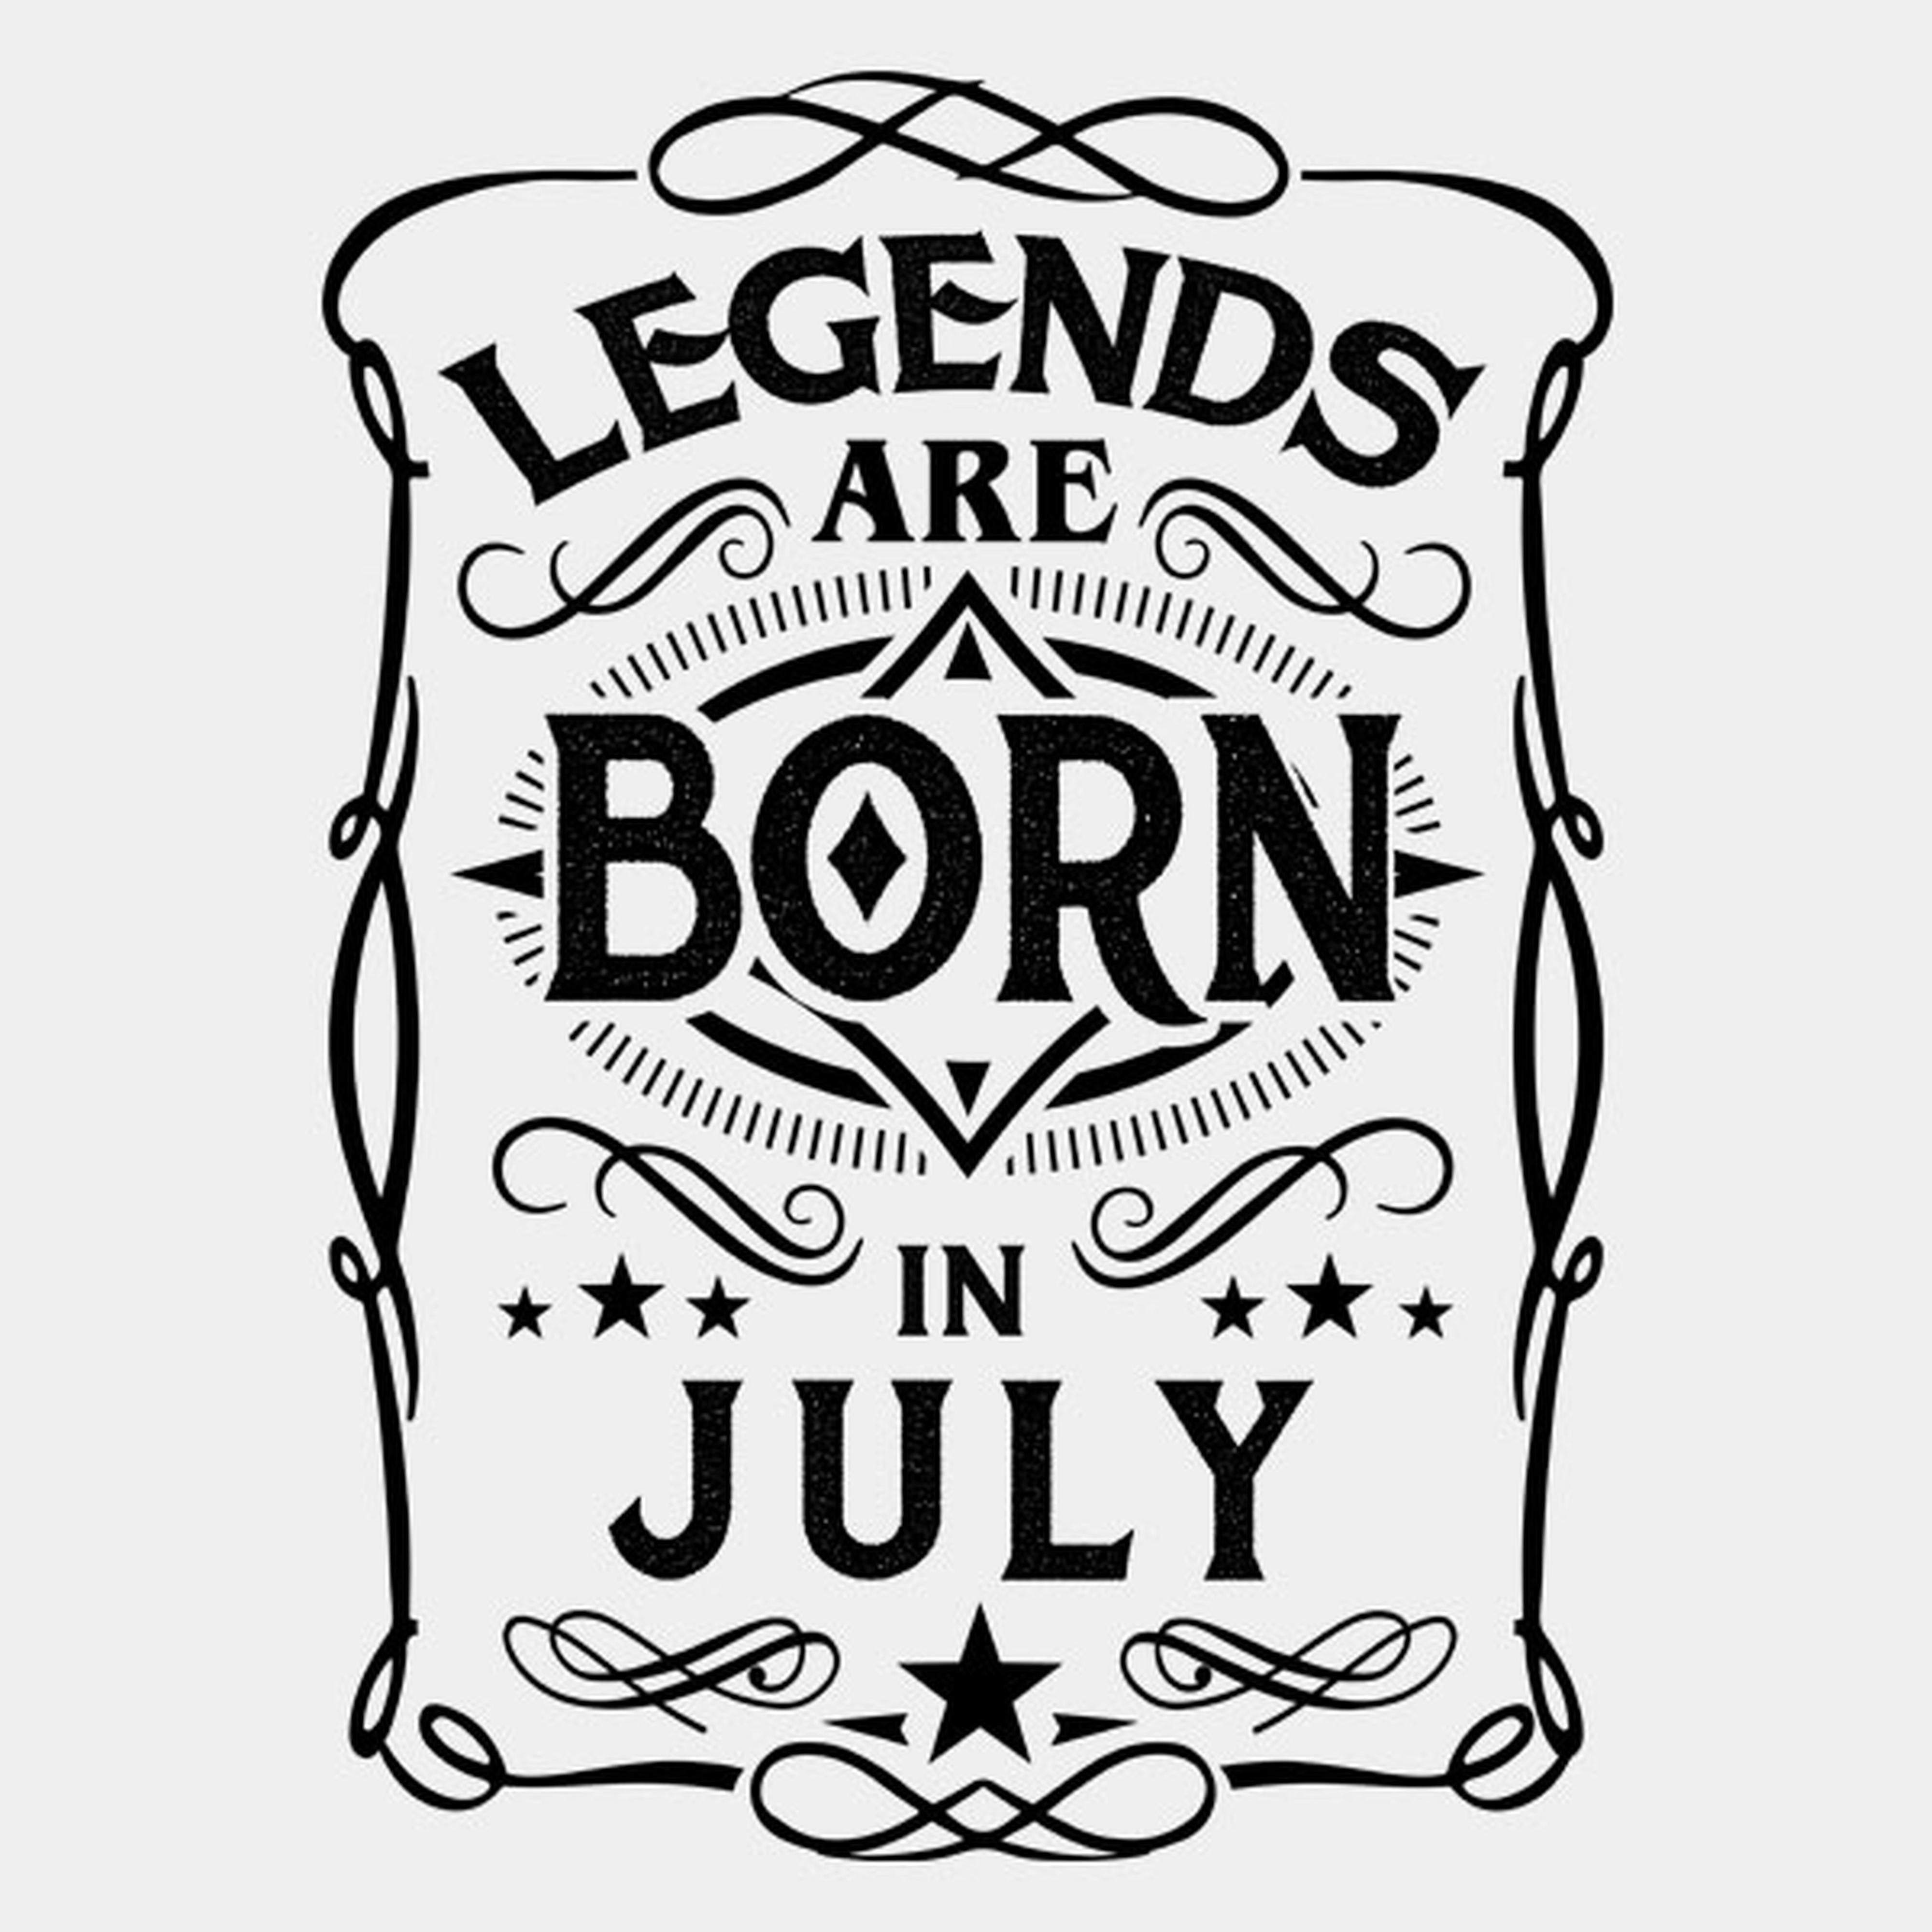 Legends are born in July - T-shirt